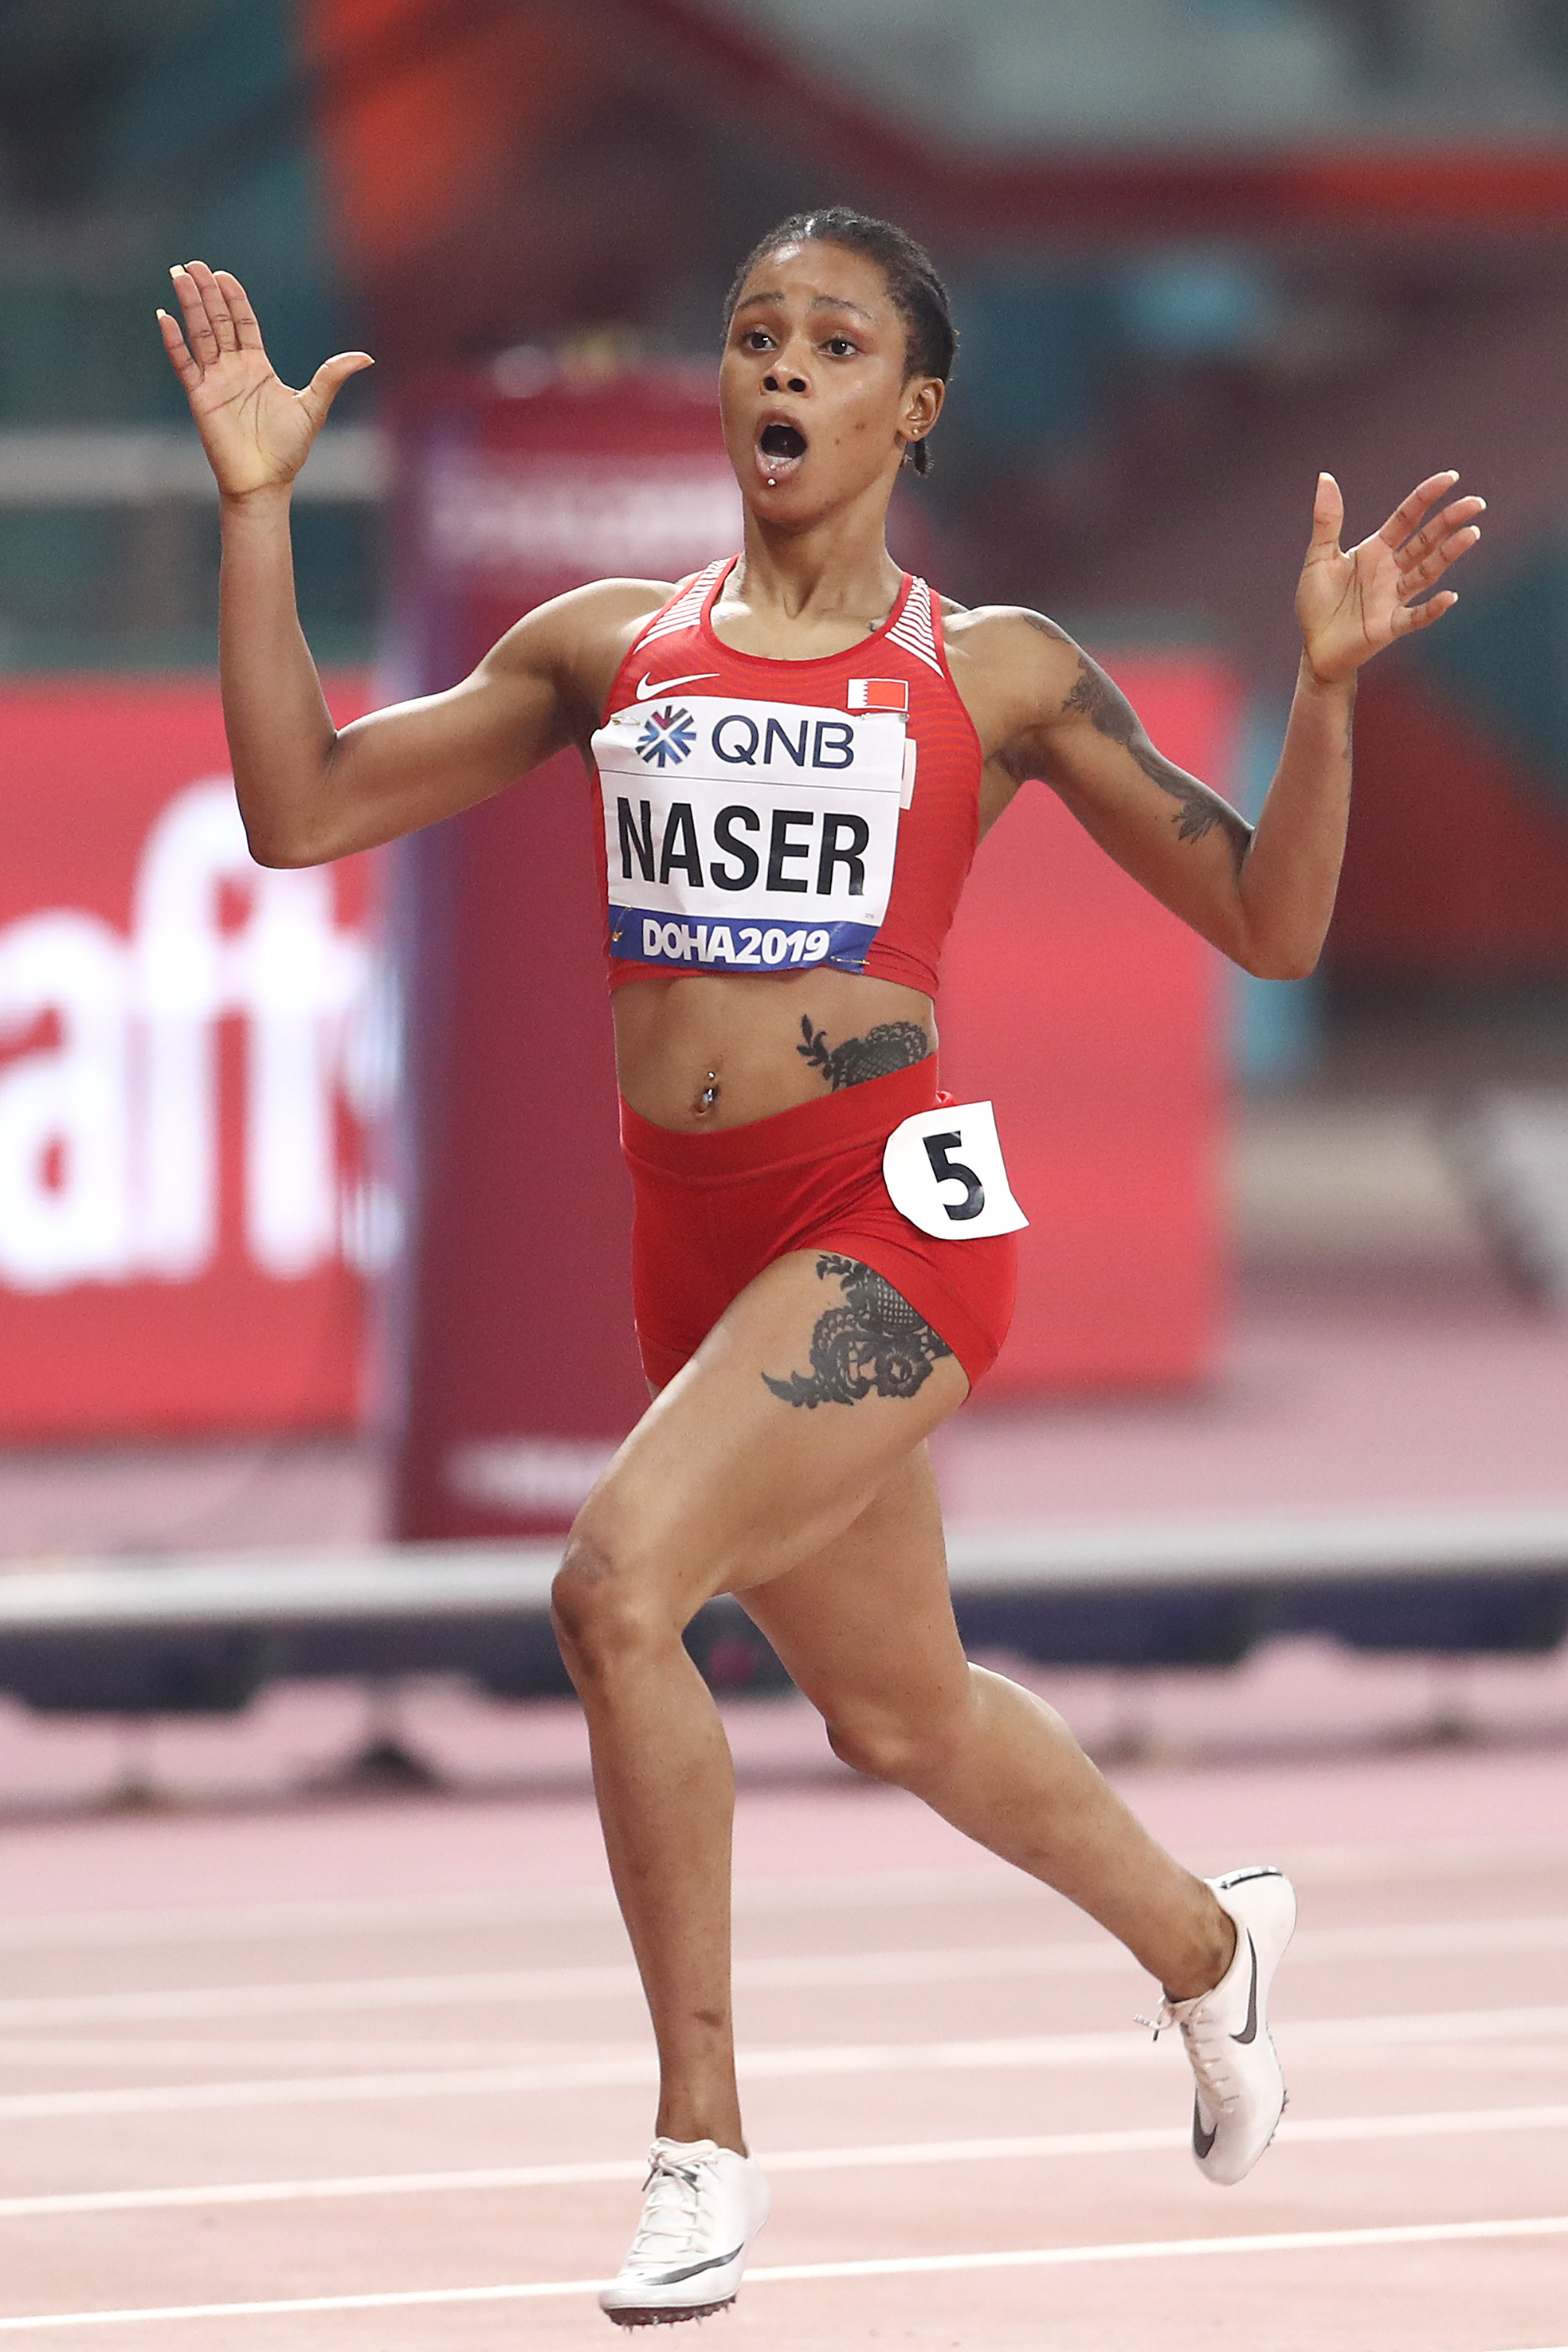 Naser to compete at Army Games